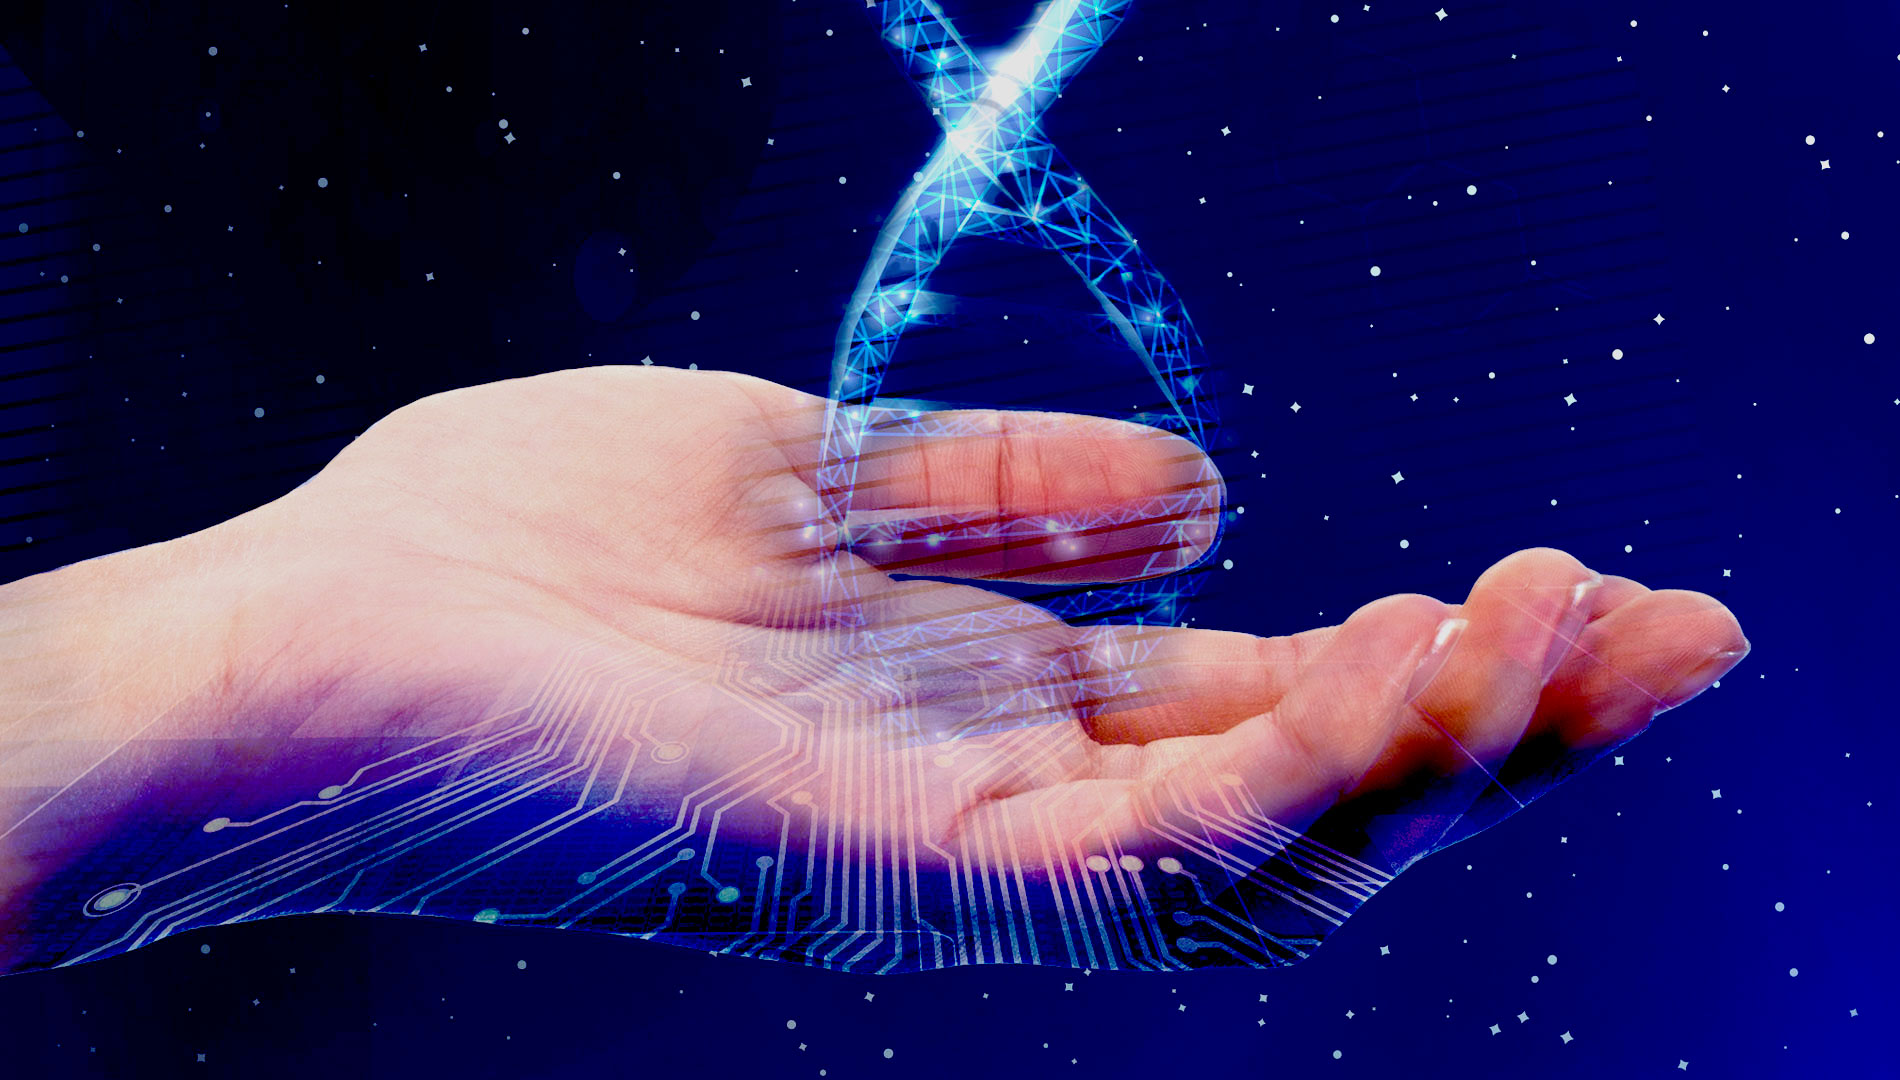 A rendering of a hand holding a strand of DNA, symbolic of long read genetic sequencing